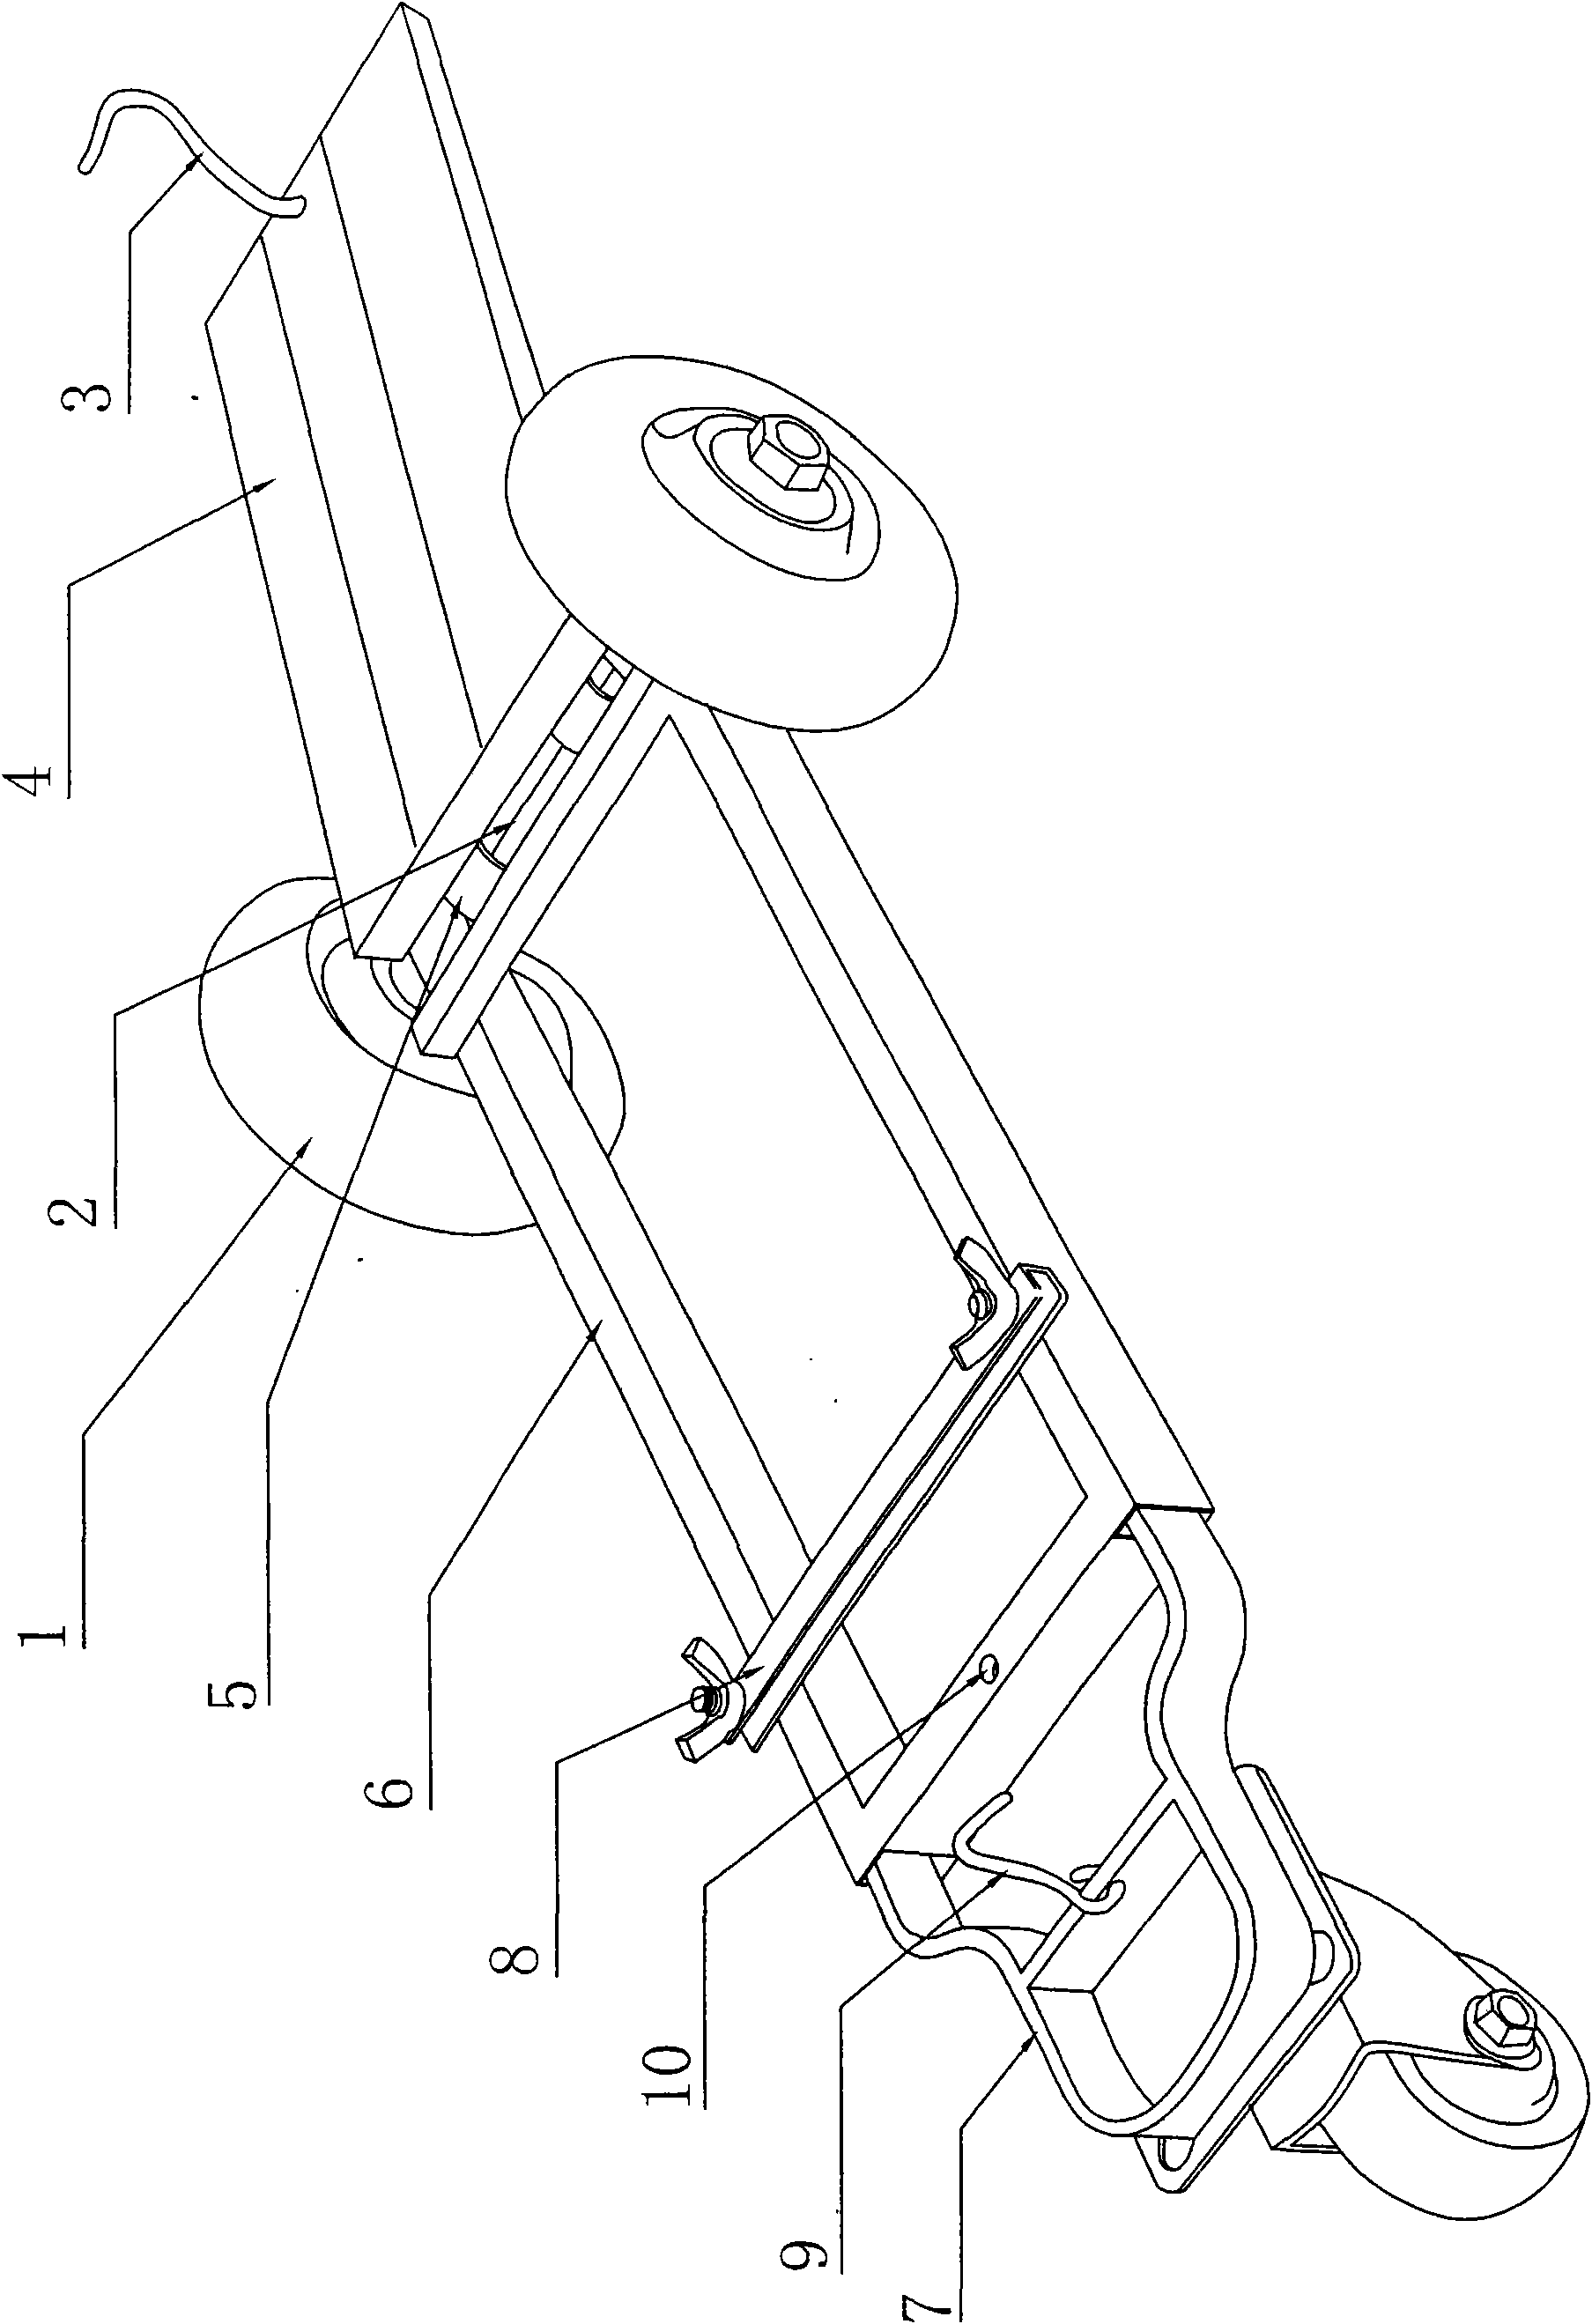 Labor-saving device for pushing and pulling two-wheeled vehicle with flat tires